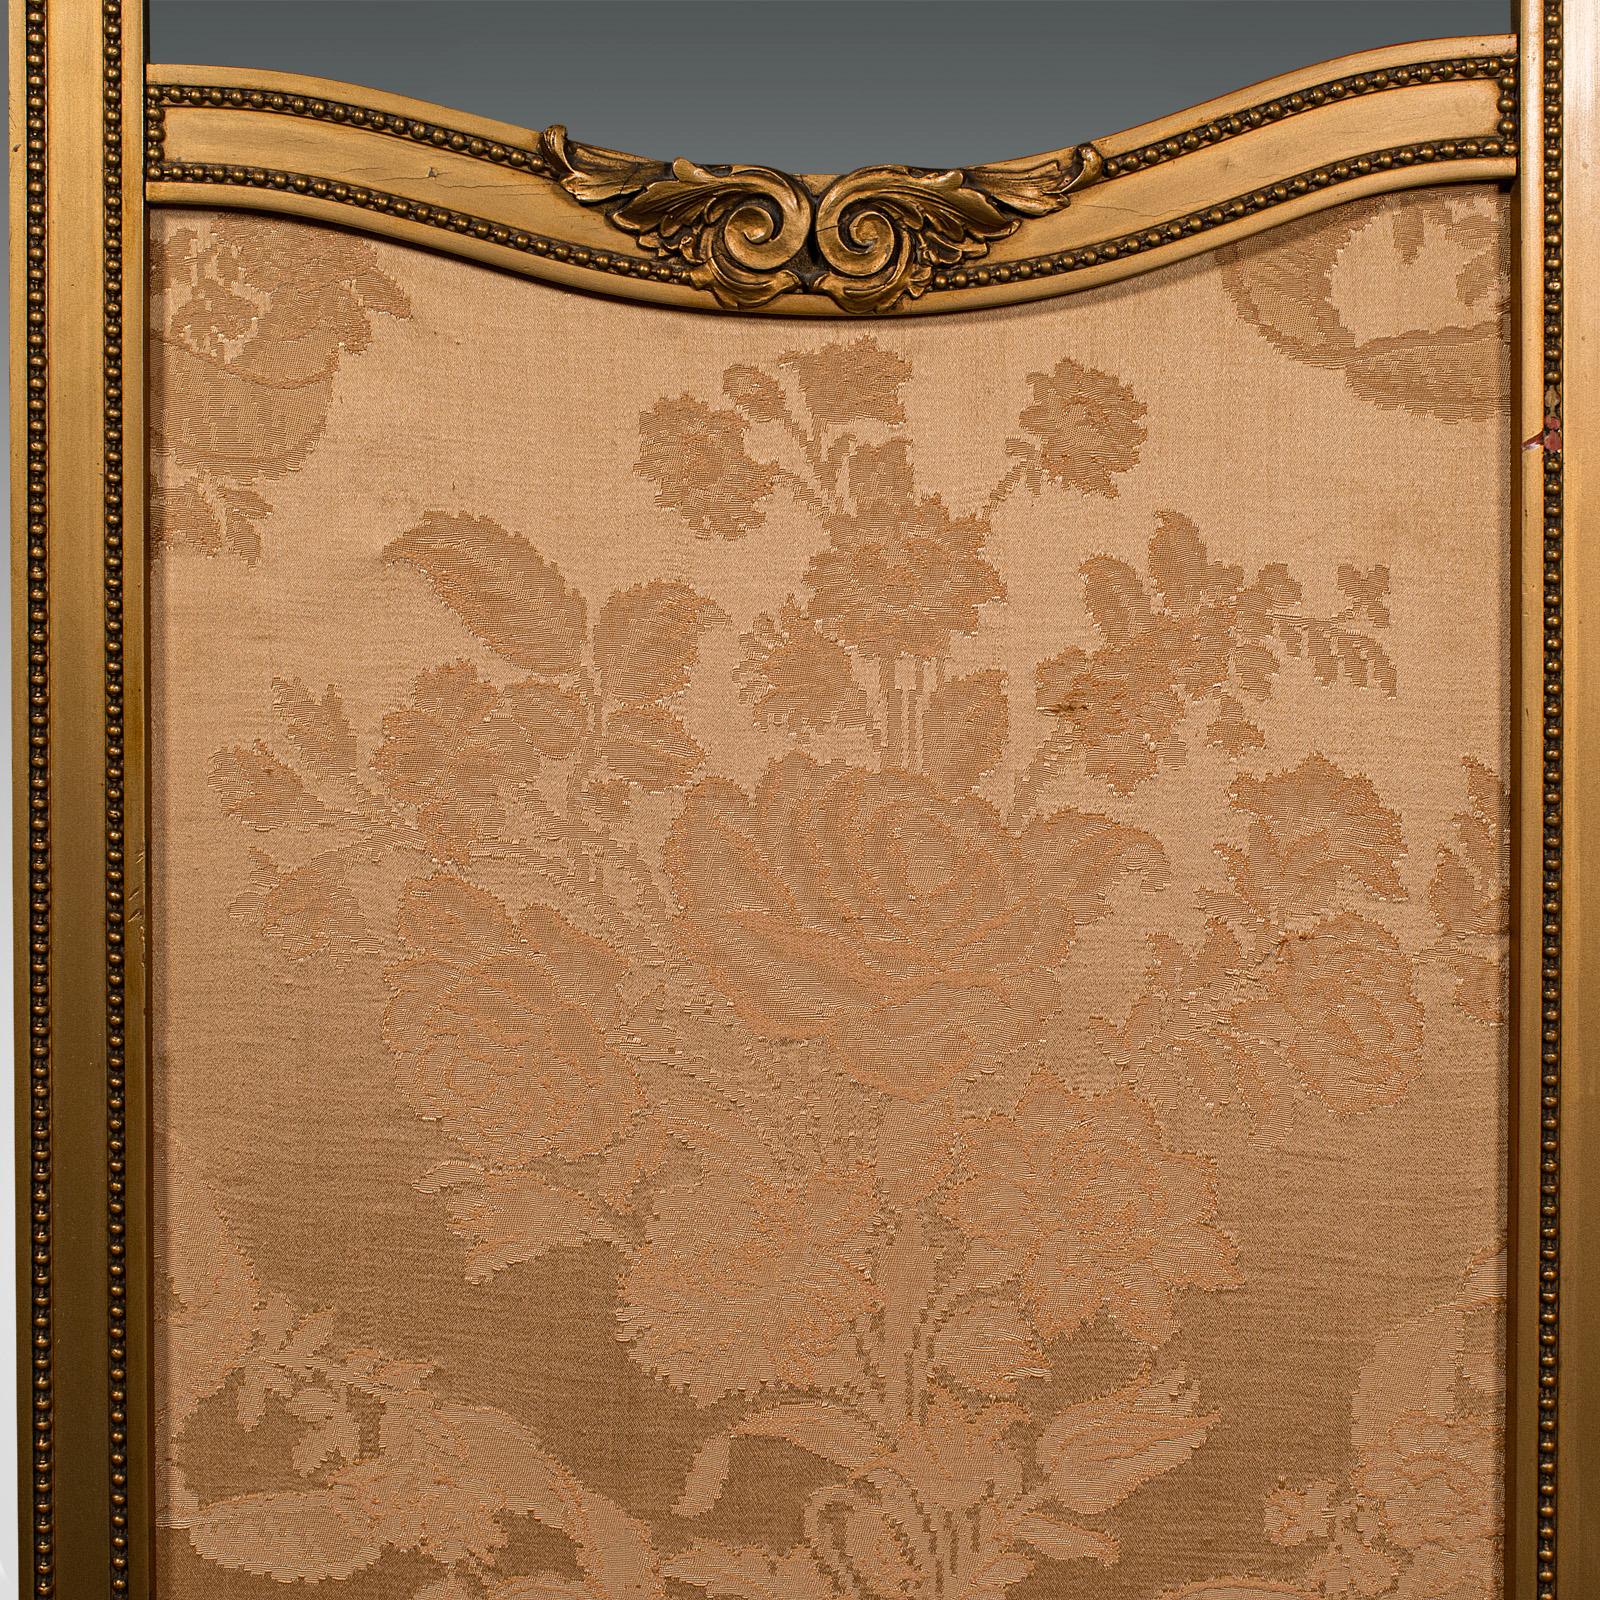 Antique 3 Panel Dressing Screen, French, Giltwood, Room Divider, Victorian, 1900 For Sale 1